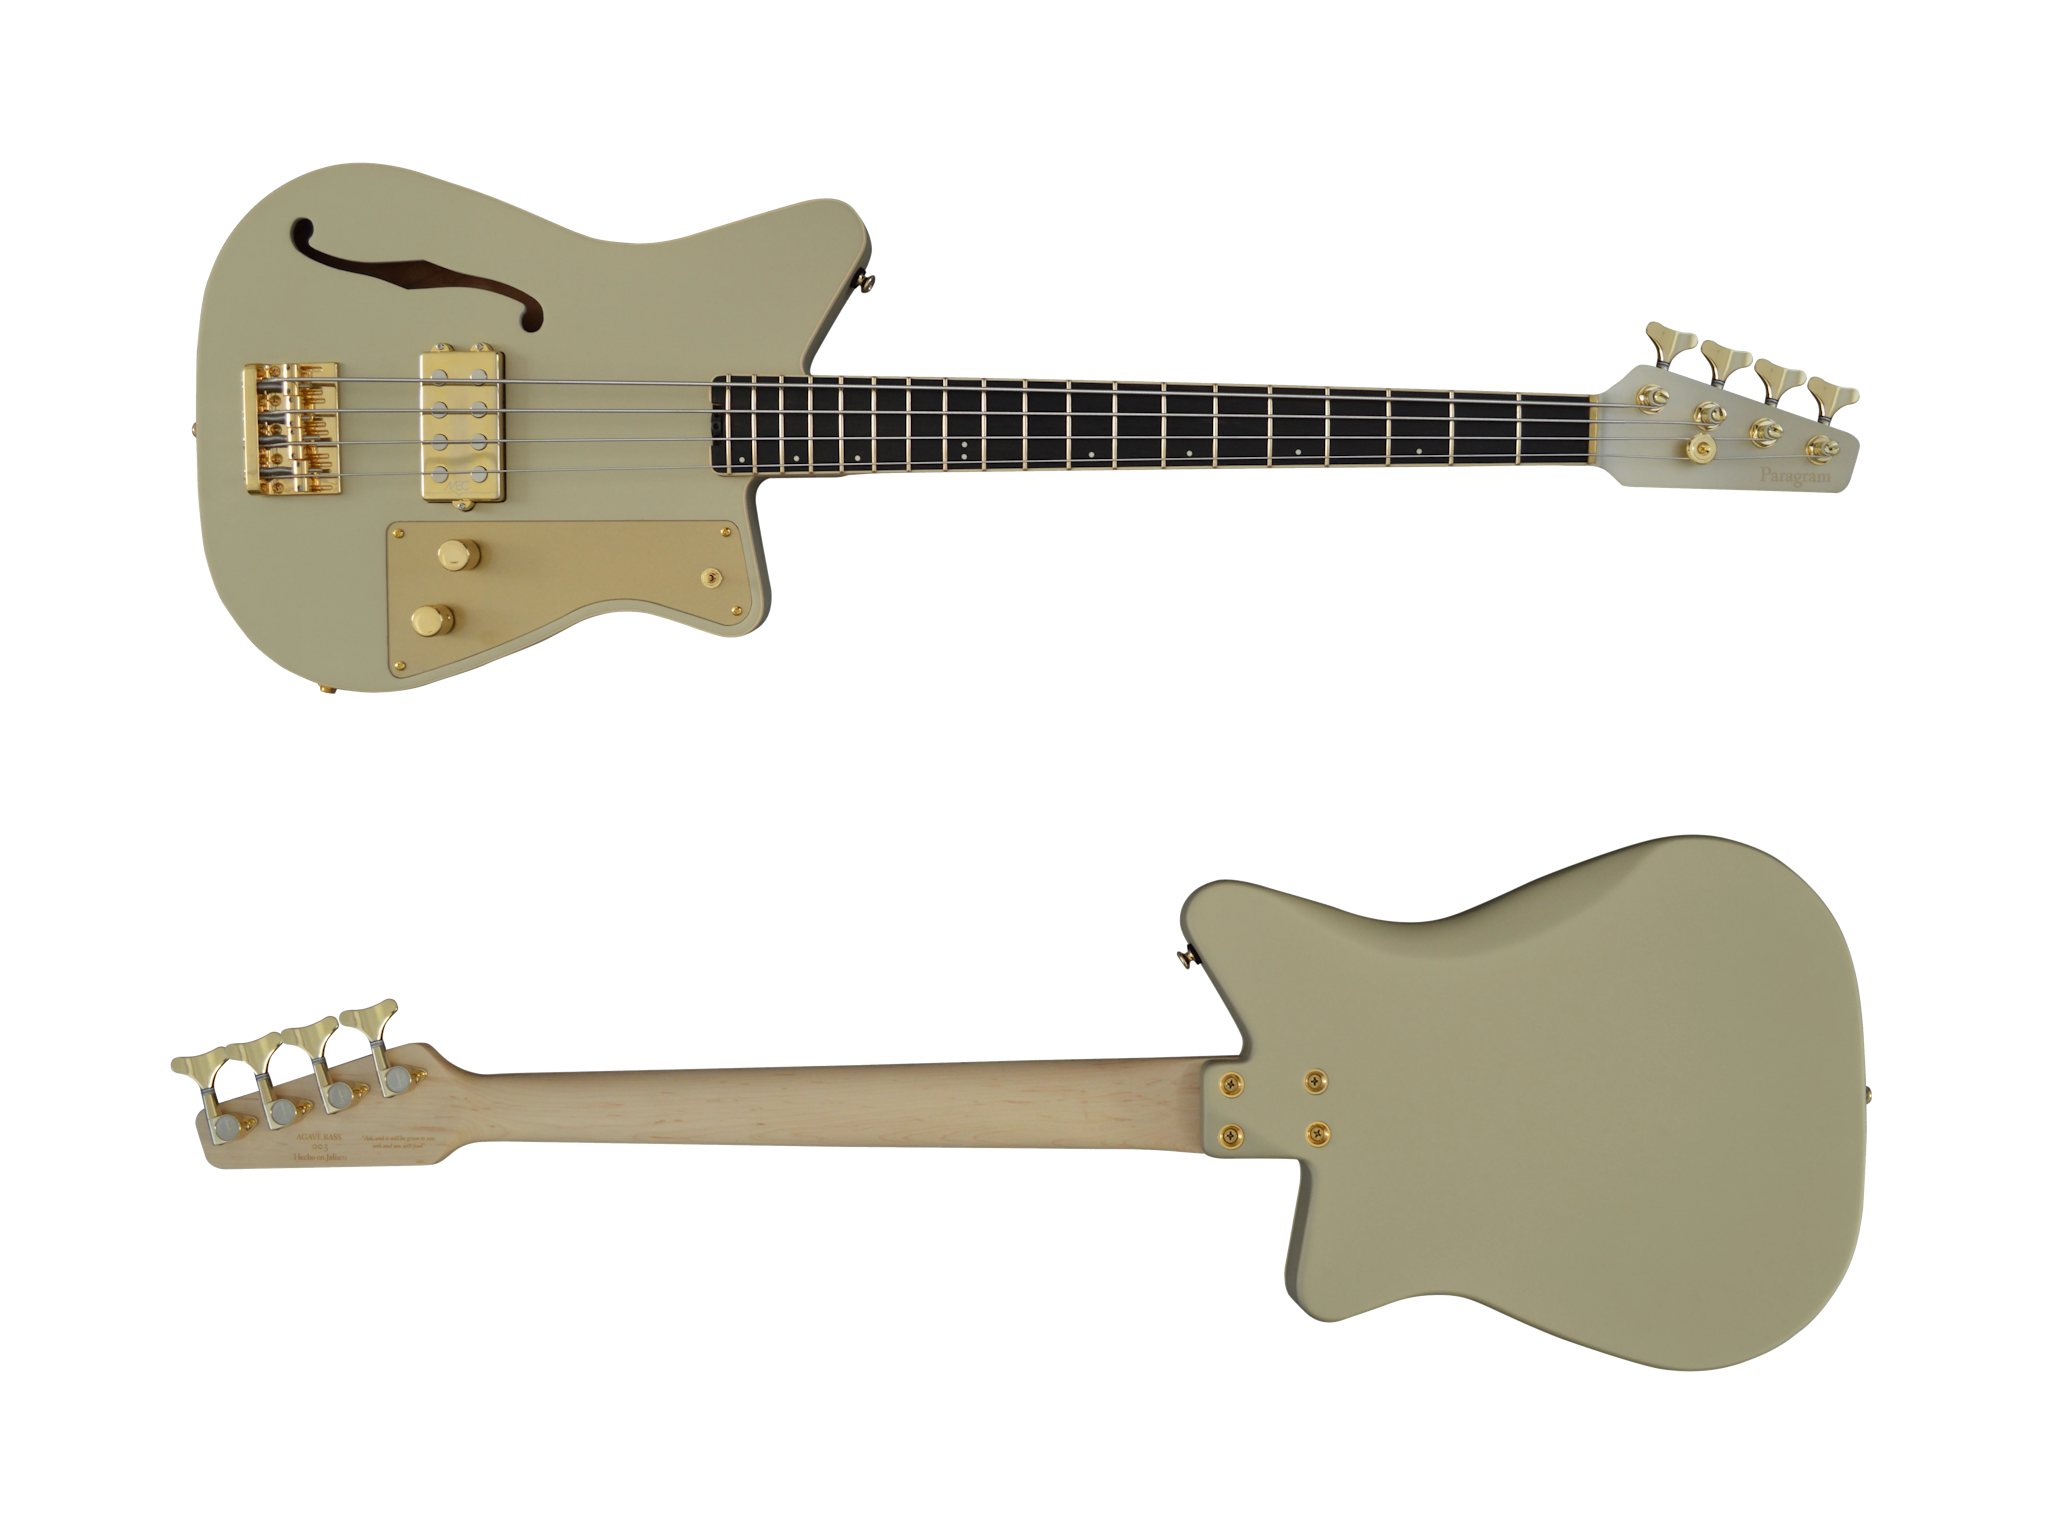 The semi-hollow Paragram bass blends traditional design with a 30" scale for depth and resonance. With the versatility akin to its solid-bodied counterpart, it offers vast customization in pickups, hardware, and wood choices for a truly unique standard-bass.